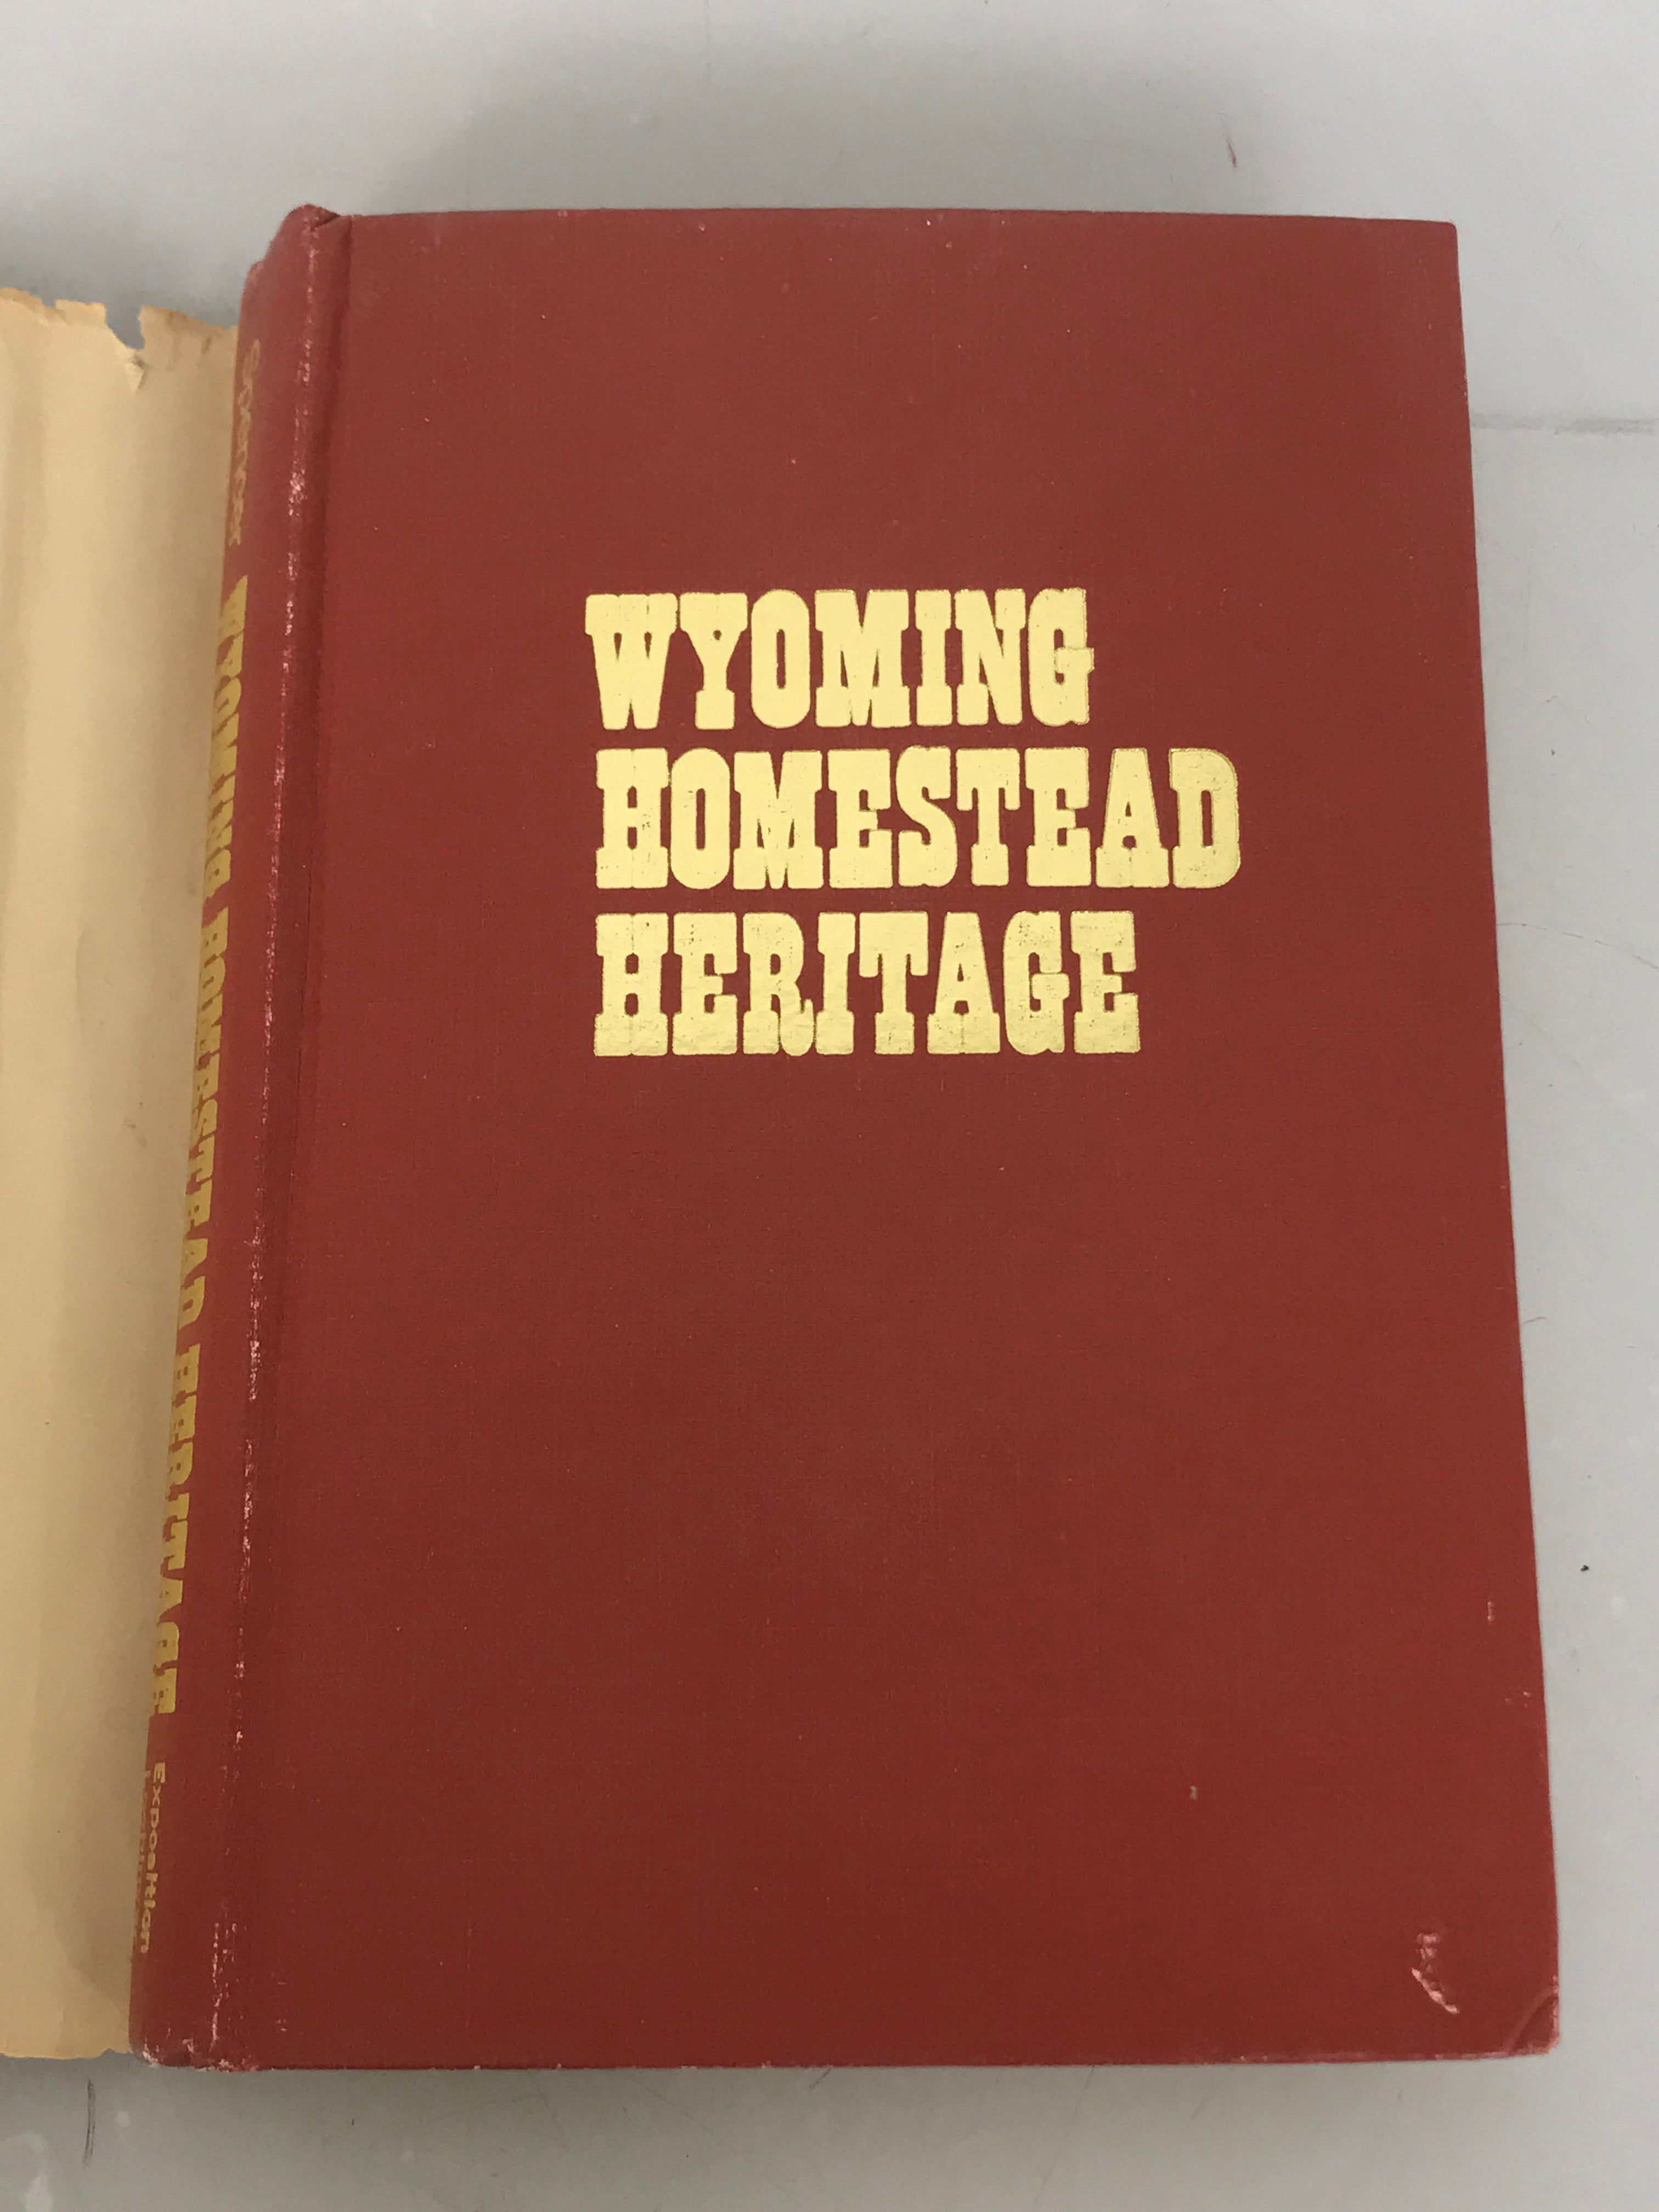 Wyoming Homestead Heritage by Charles Floyd Spencer 1975 Signed HC DJ